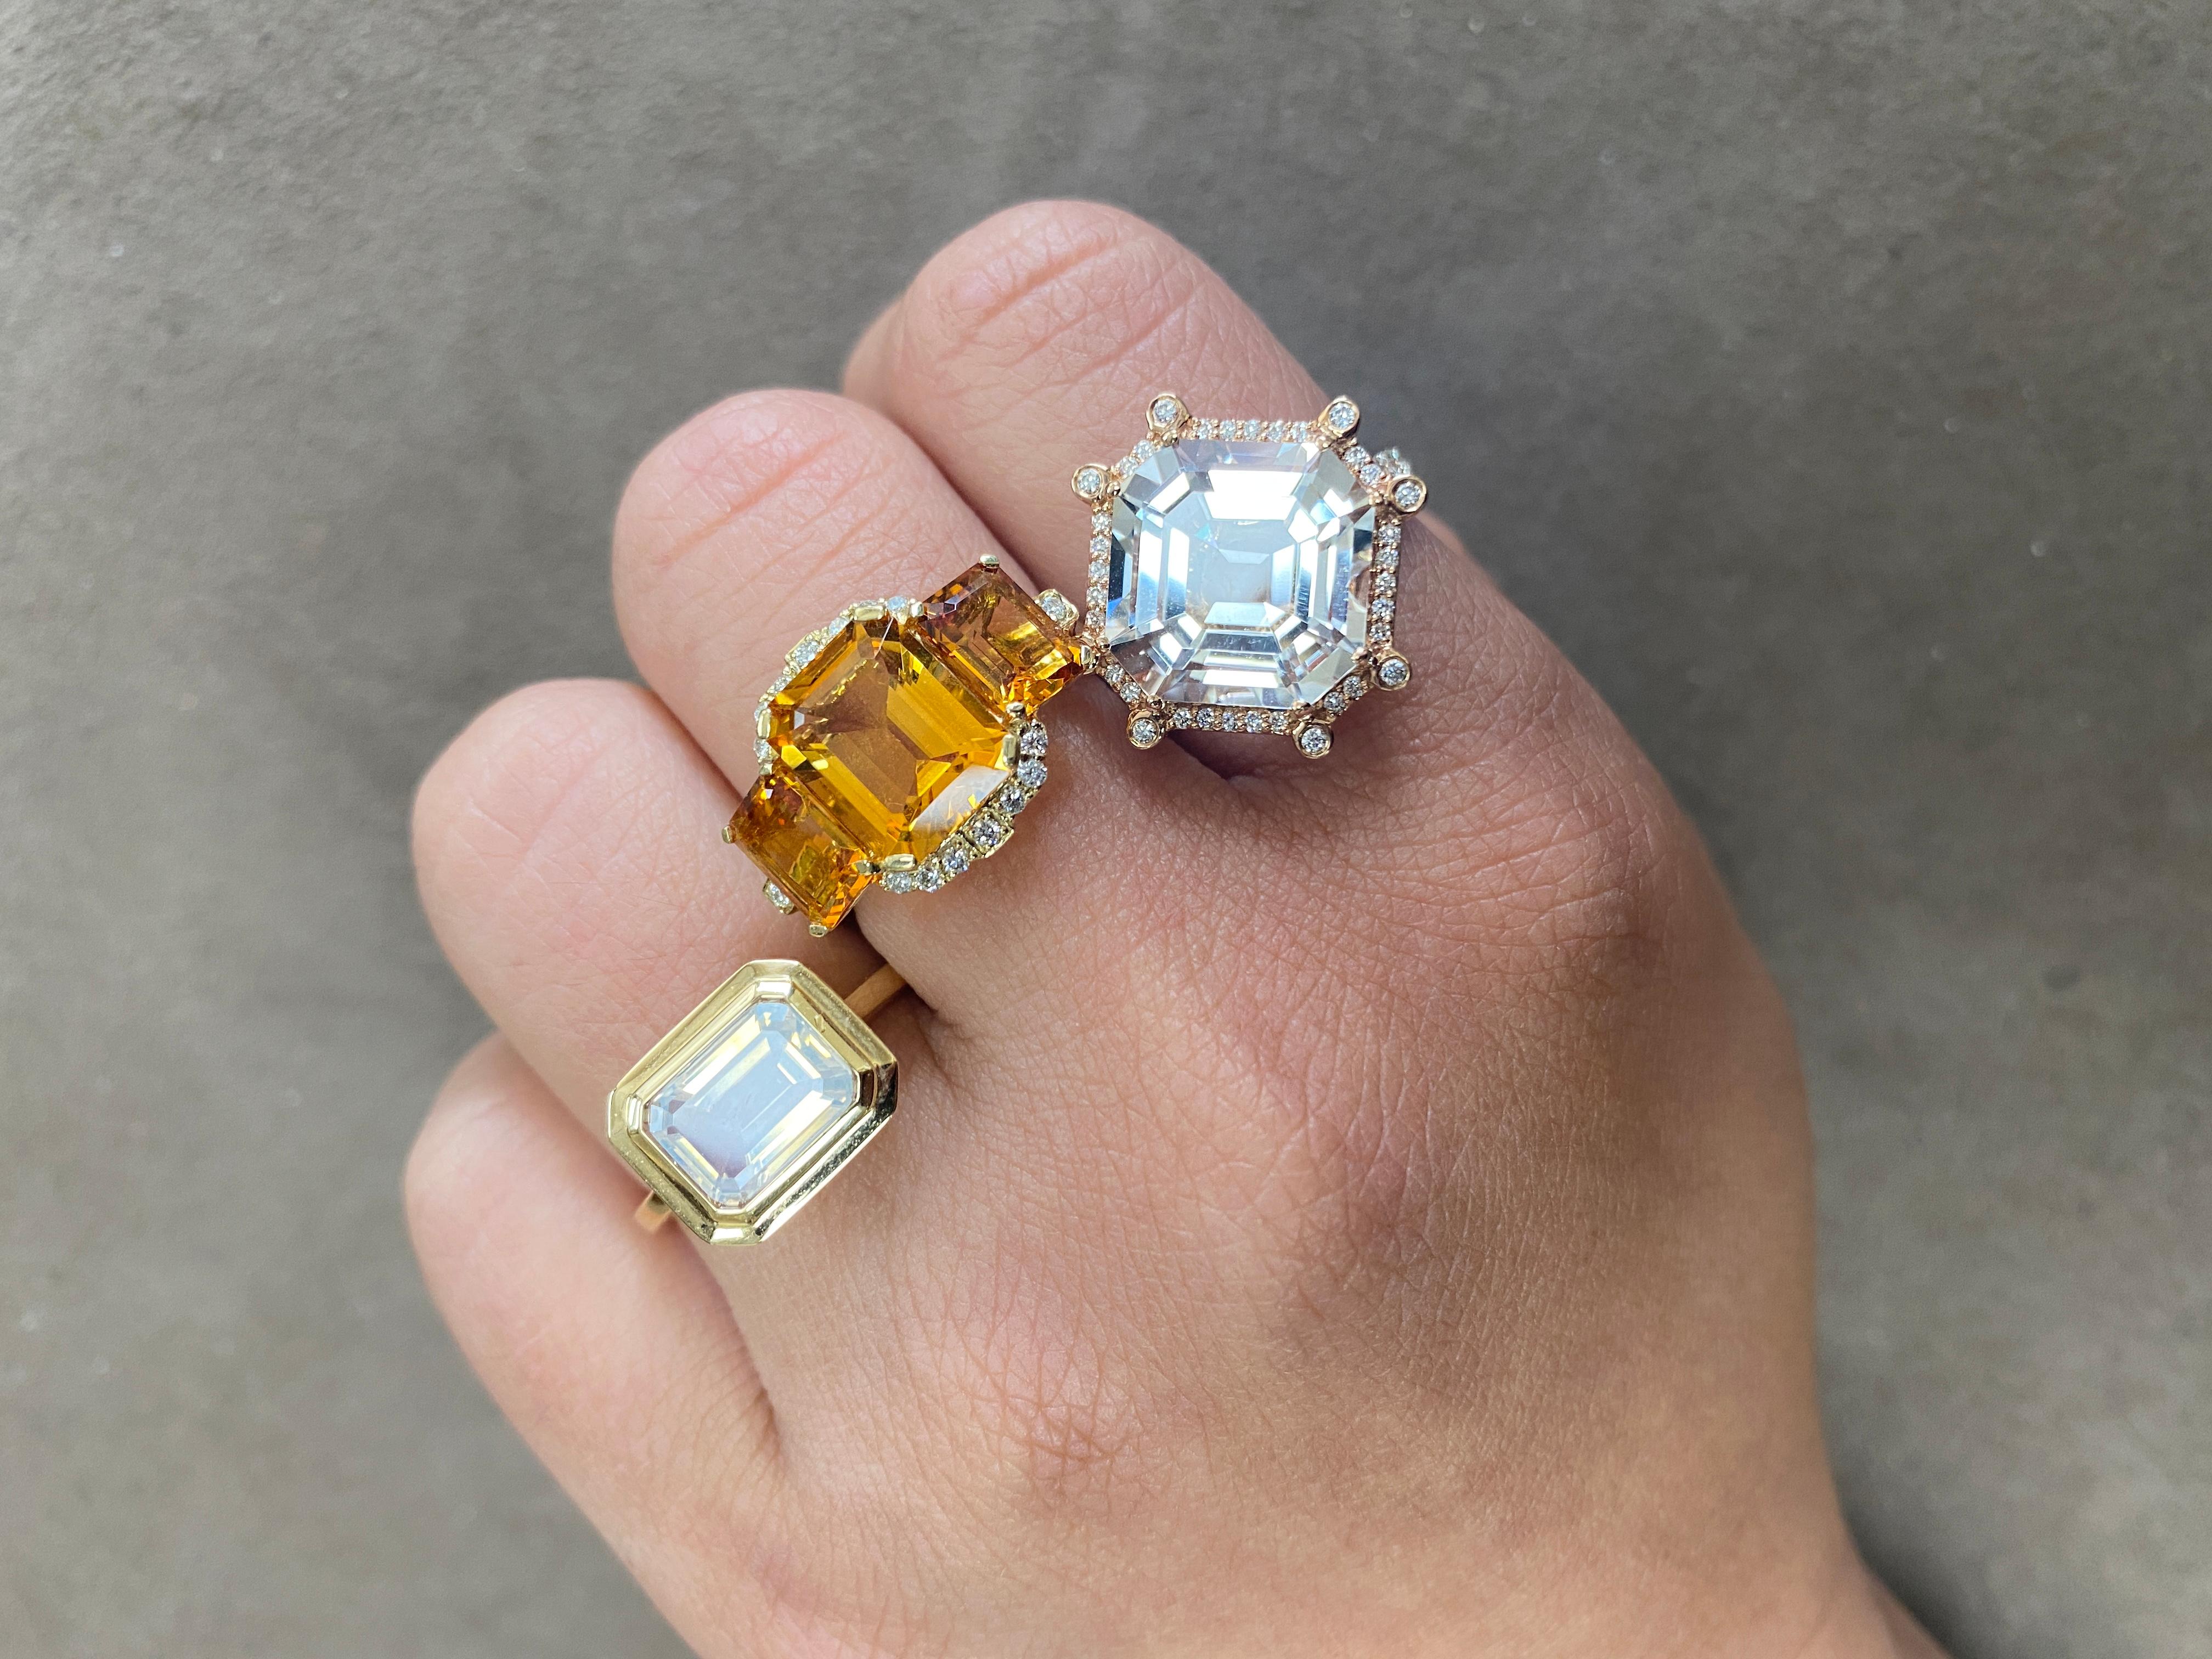 Citrine 3 Stone Emerald Cut Ring with Diamonds set in 18K Yellow Gold. From our popular 'Gossip' Collection, this piece carries a hint of shock value.

* Stone Size: 10 x 8 - 7 x 5 mm
* Gemstone: 100% Earth Mined 
* Approx. gemstone Weight: 4.64